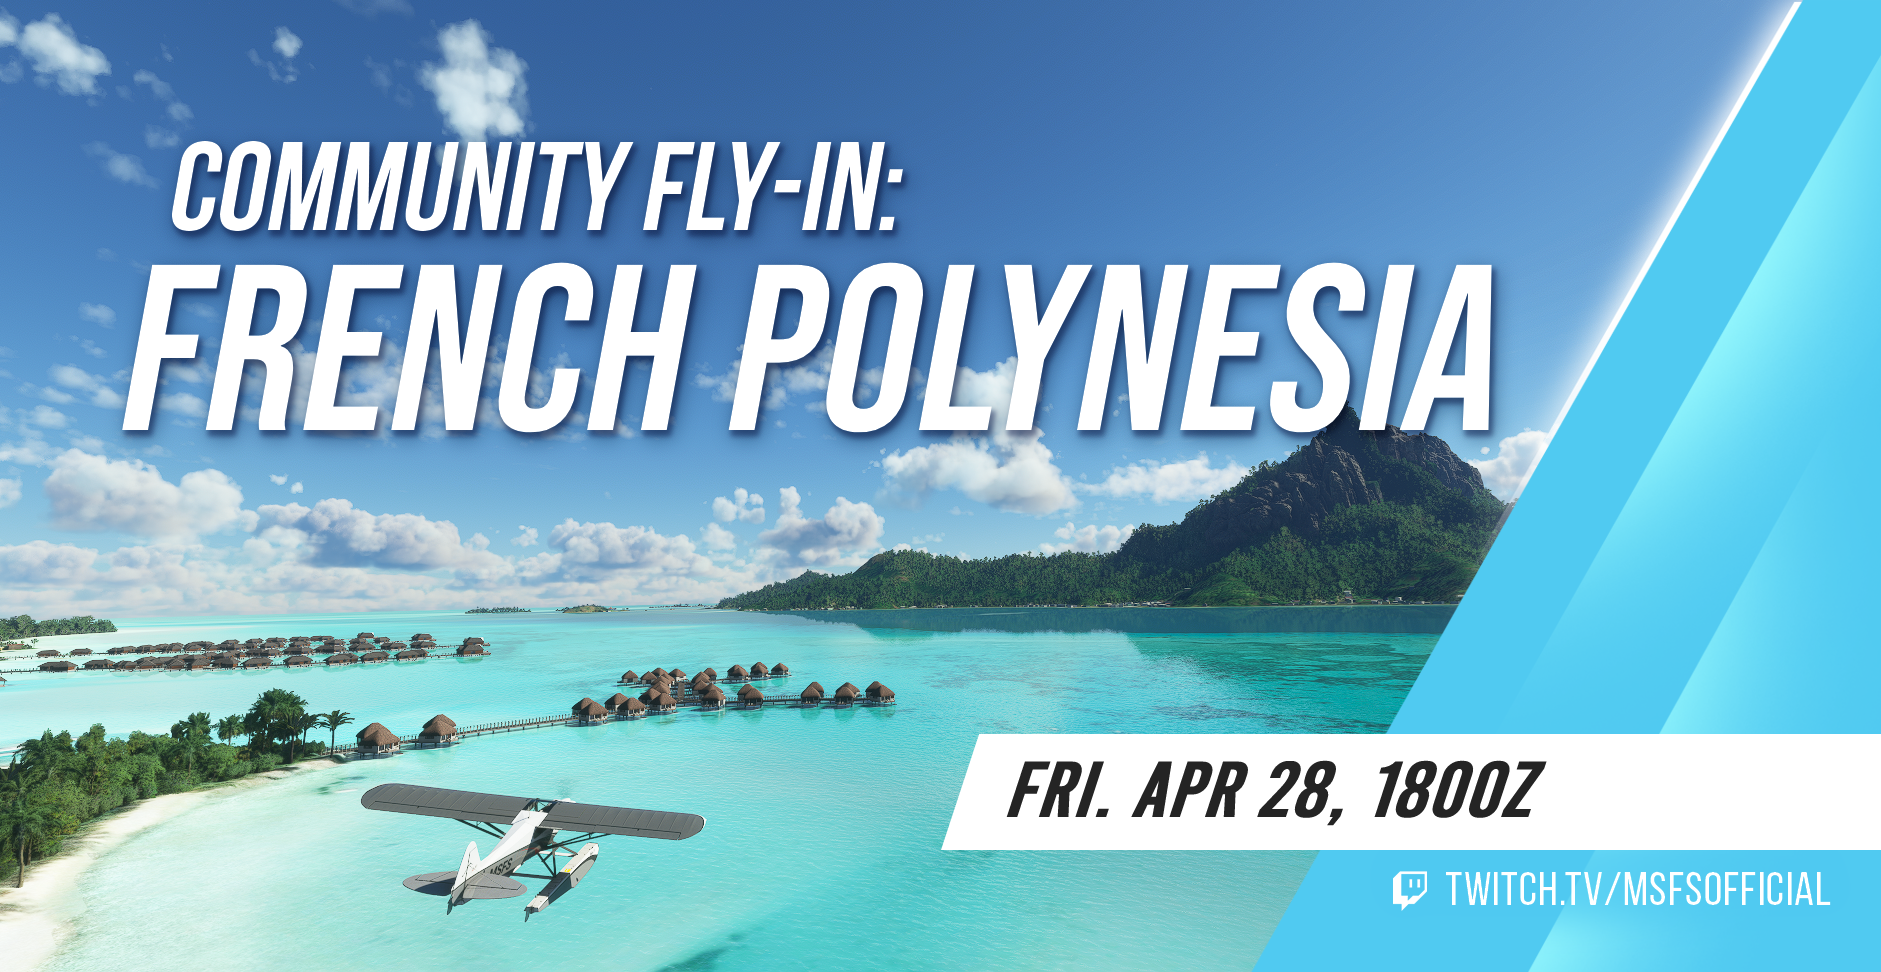 Community Fly-In: French Polynesia. Join us at twitch.tv/msfsofficial on April 27th at 1800Z!